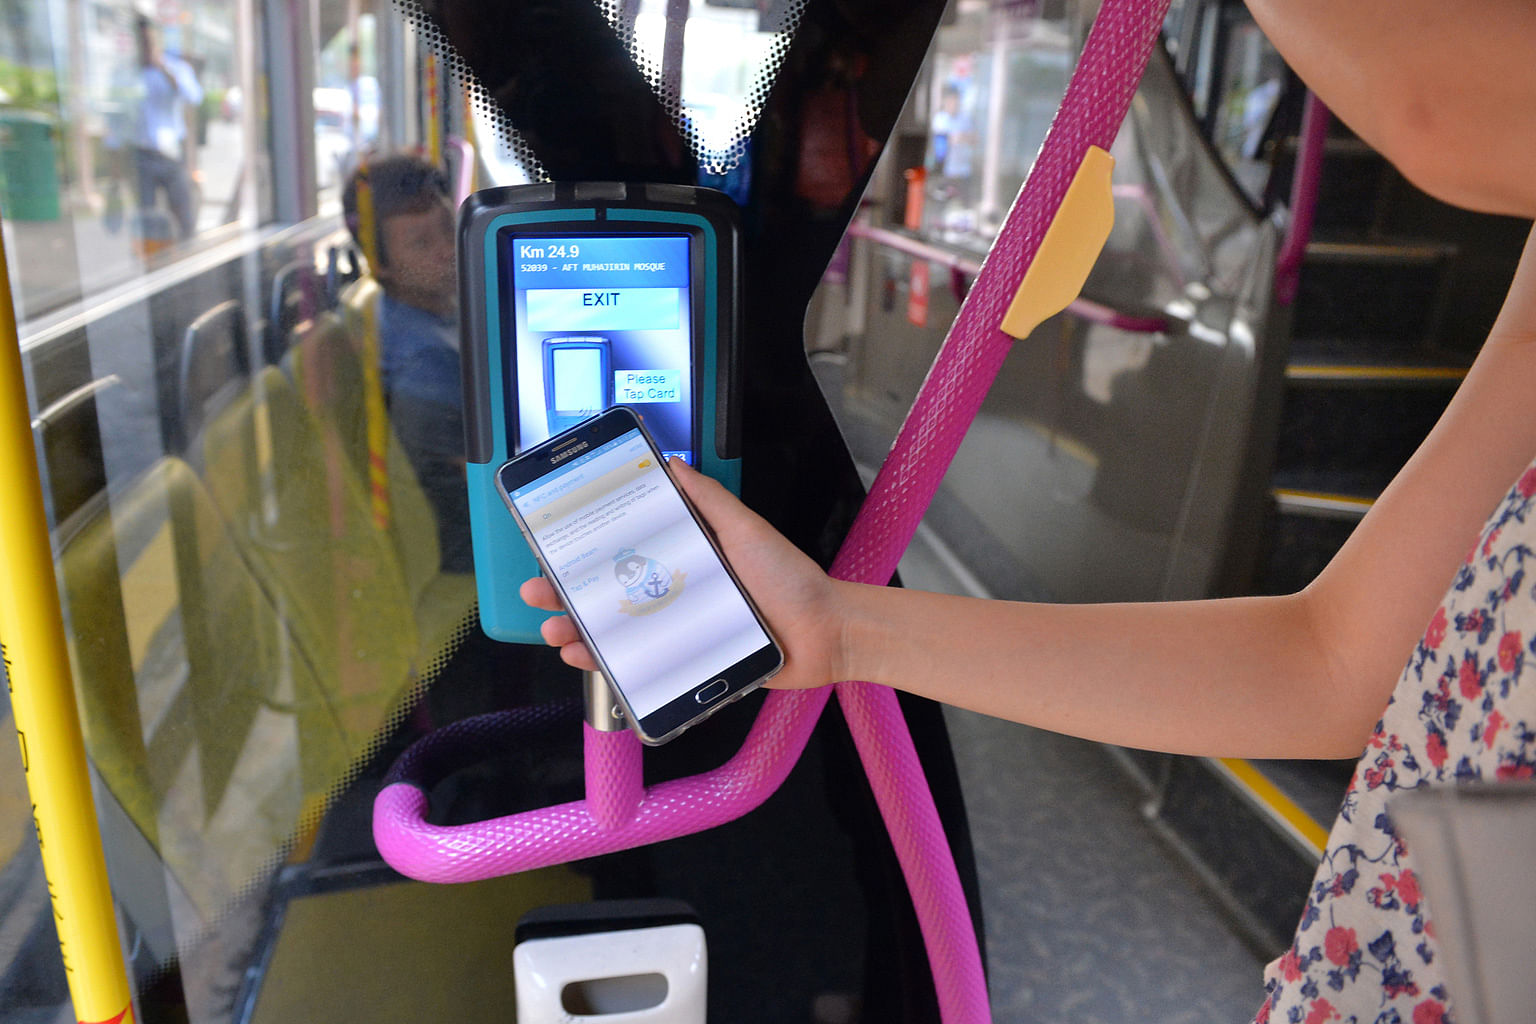 Even though NFC technology can now be used in mobile phones to tap for payment on buses and trains, there remain some snags, including the card reader's sensor being unable to detect the chip (left) unless the phone is very near the reader.